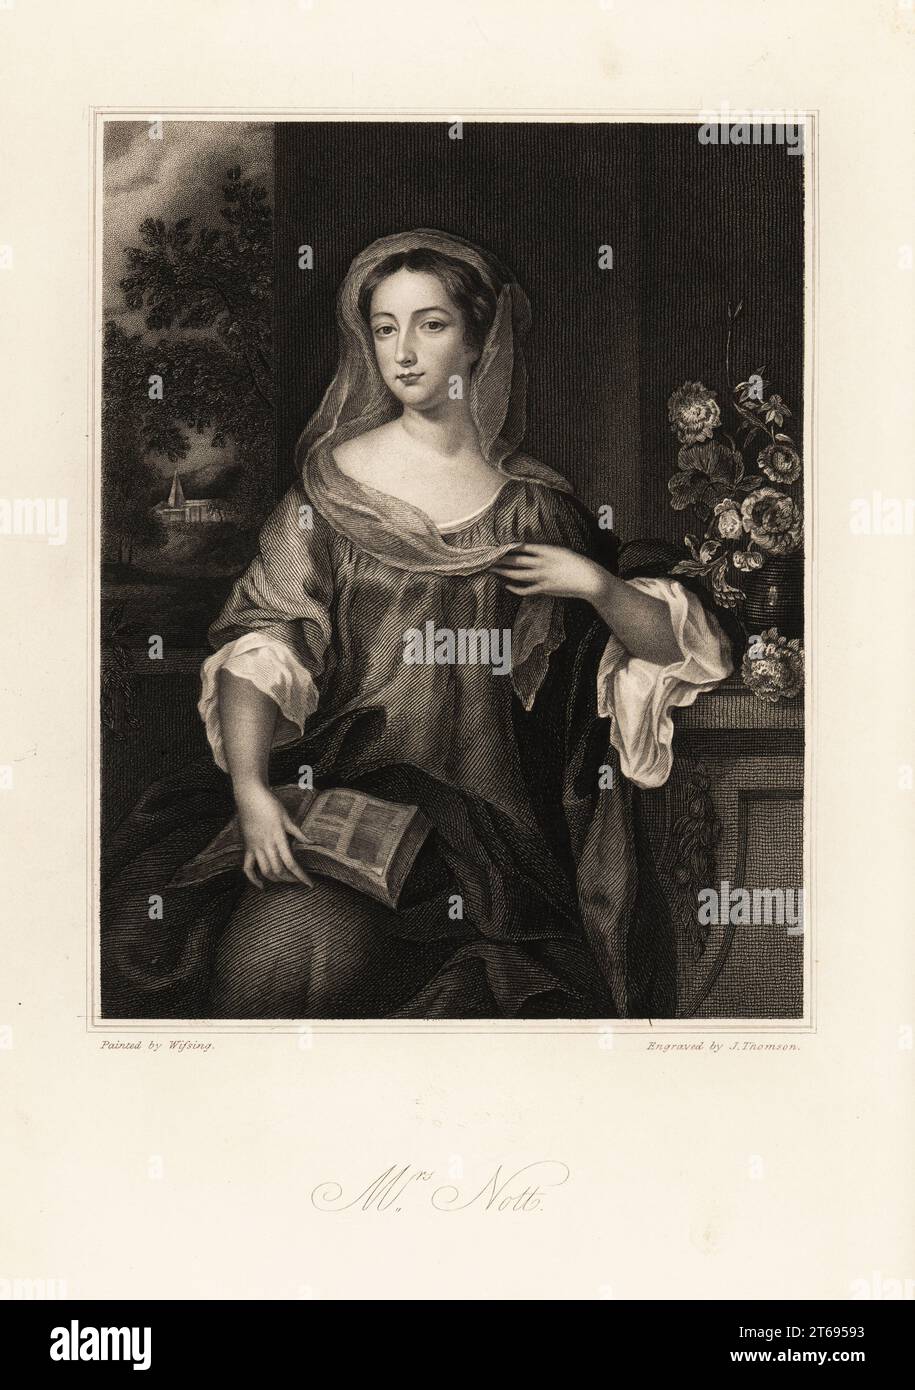 Portrait of Mrs Nott of Canterbury, nee Miss Stanley, d. 1711, one of three court beauties for Mary II, Princess of Orange. Seated, in veil, reading a book. Steel engraving by J. Thomson after a portrait by Willem Wissing from Mrs Anna Jamesons Memoirs of the Beauties of the Court of King Charles the Second, Henry Coburn, London, 1838. Stock Photo